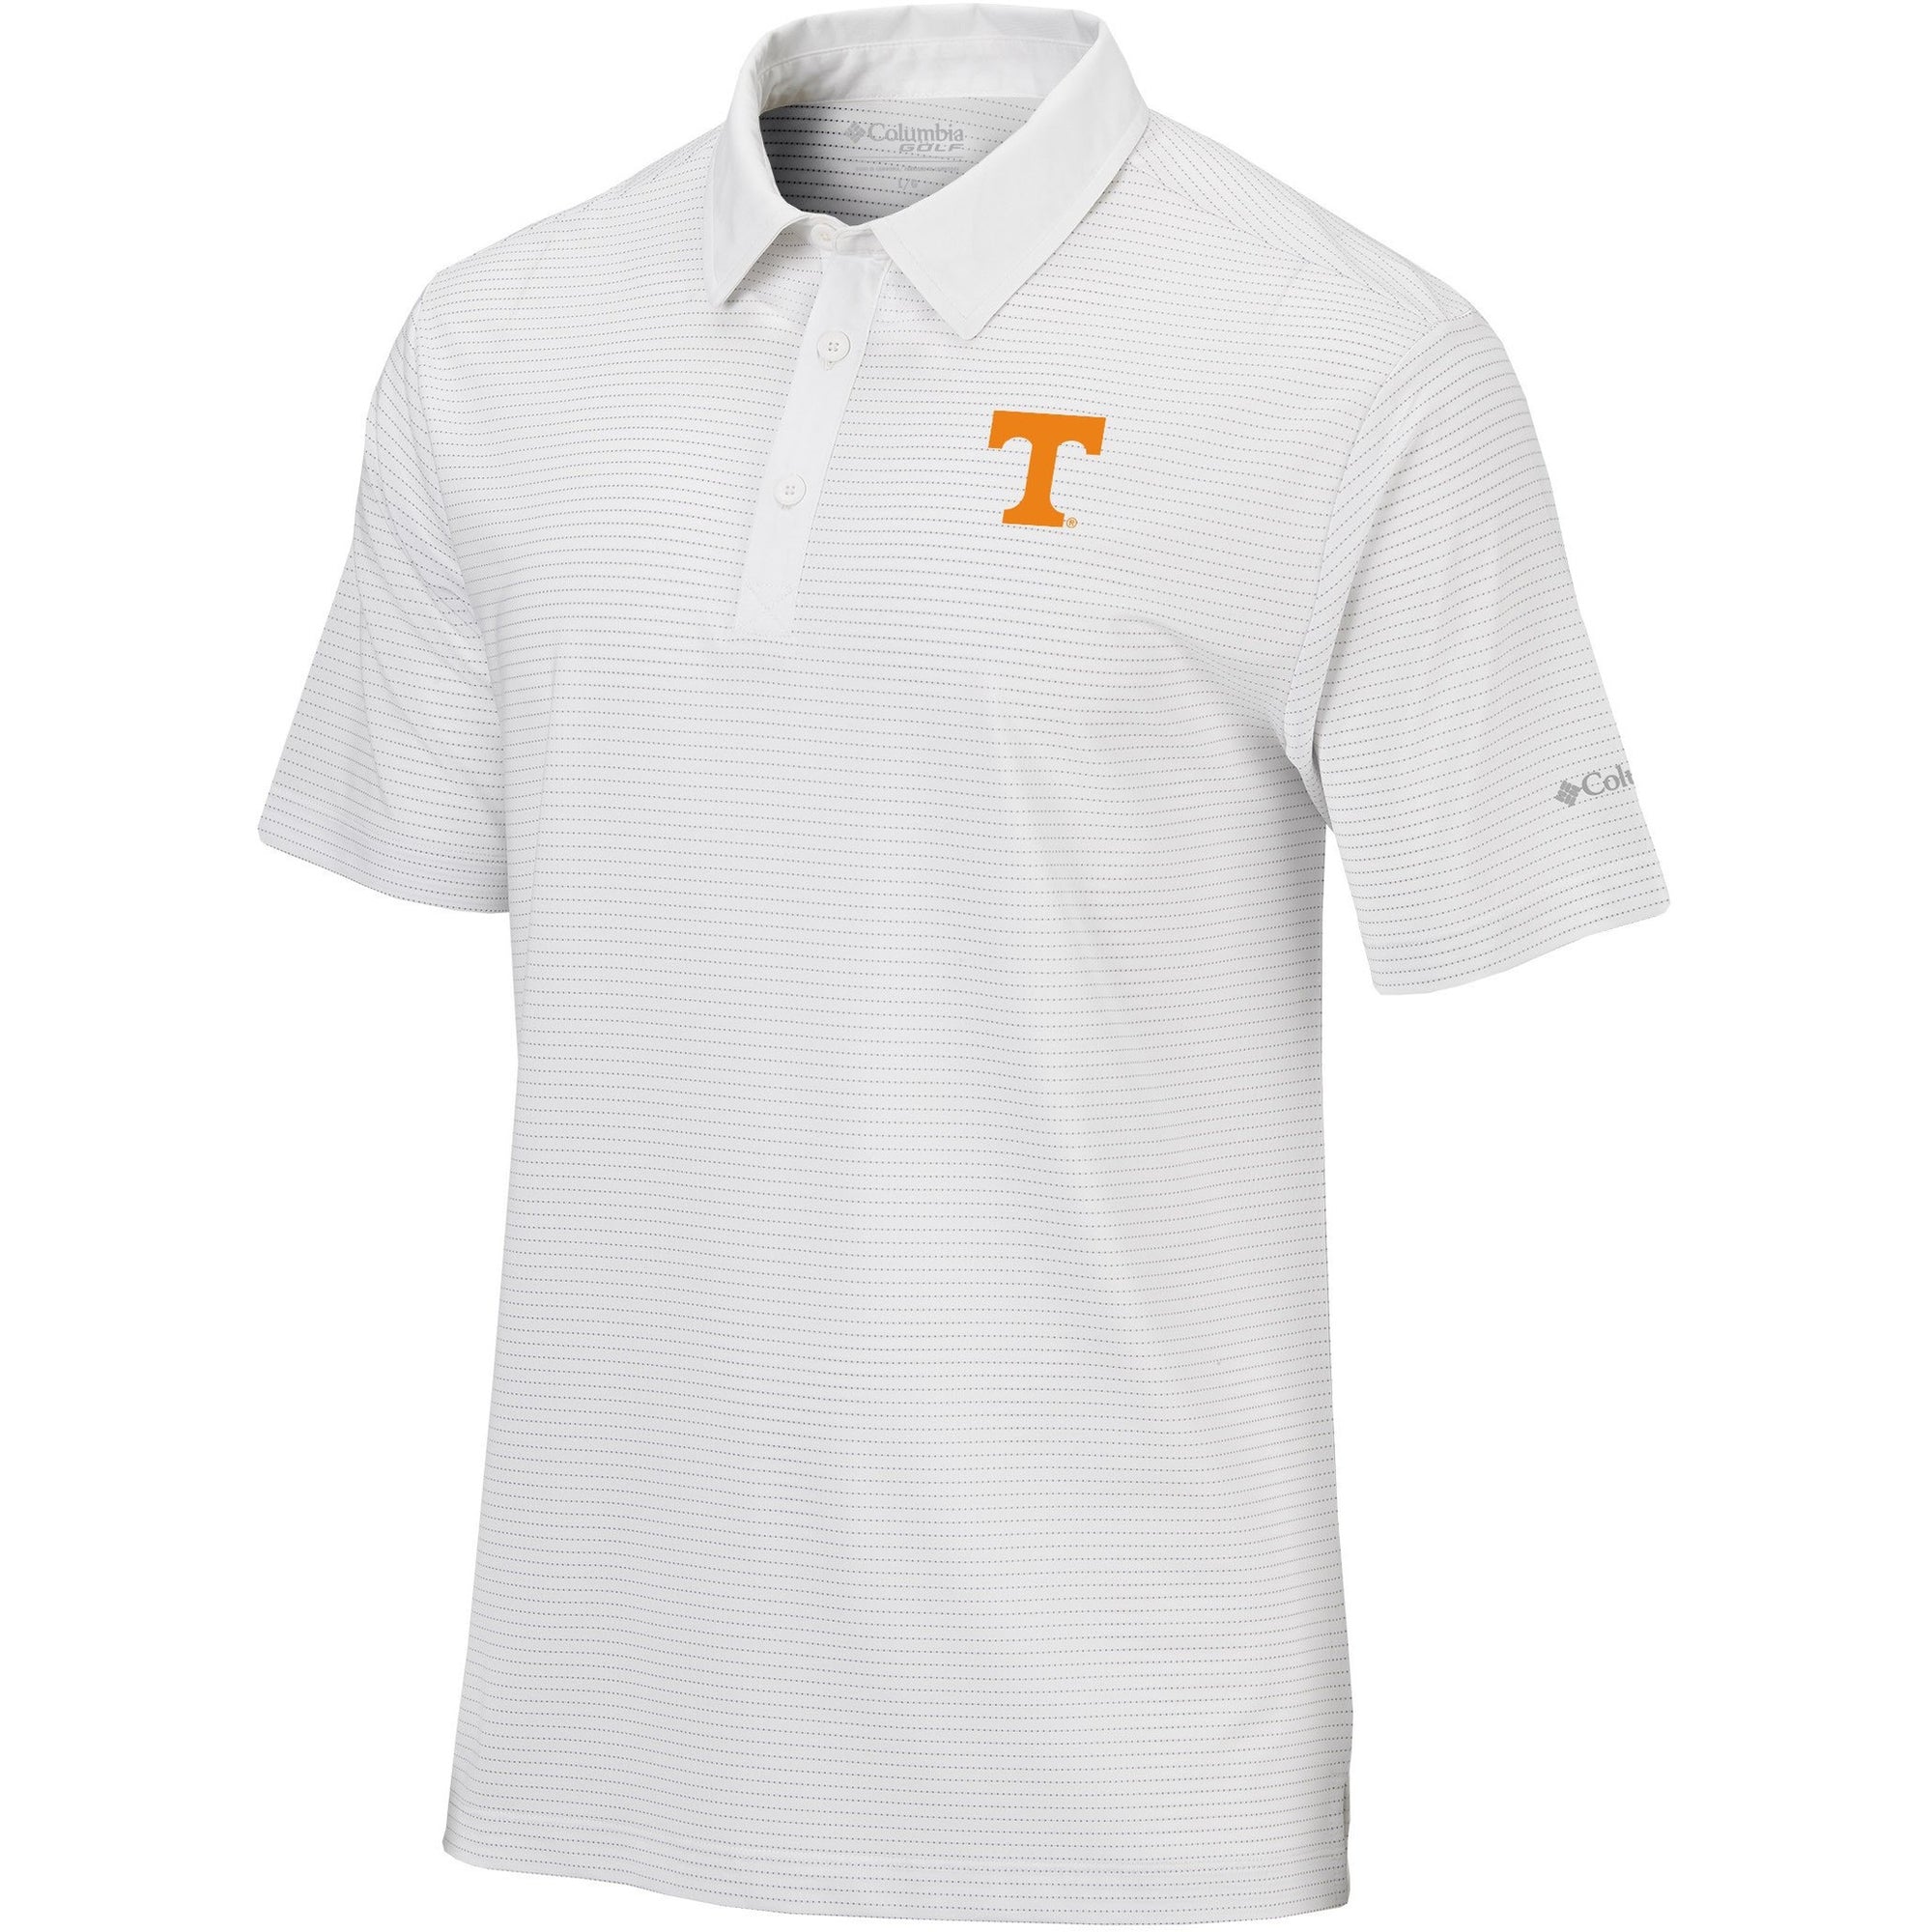 Tennessee "Vol Nation" Columbia Polo